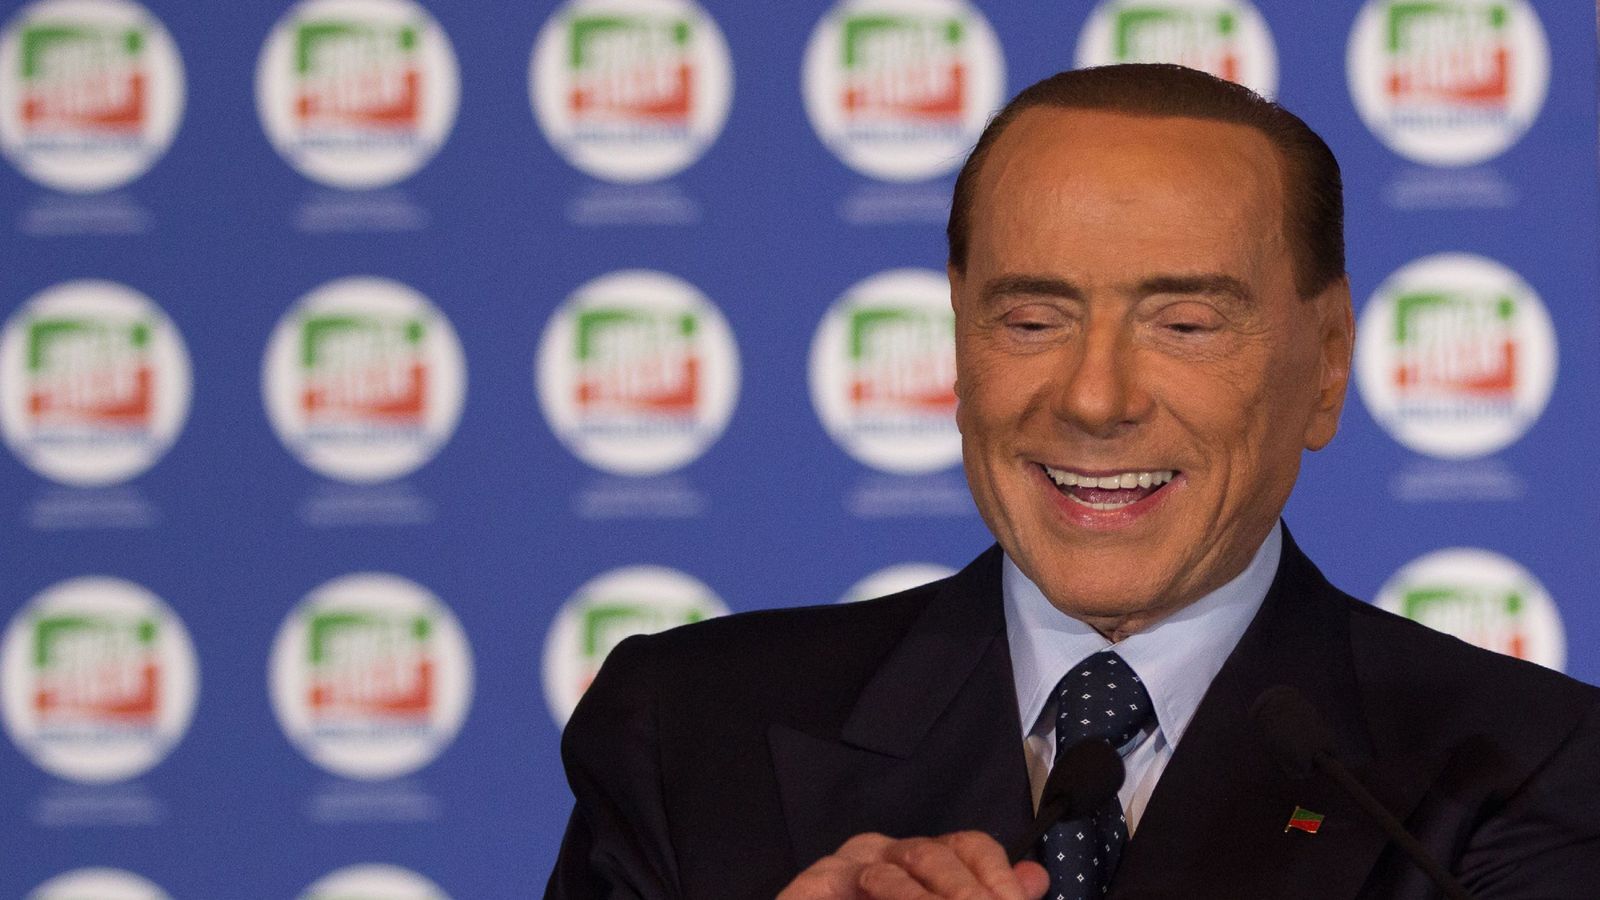 Berlusconi to Return to Series A after Monza Promoted to Series B?